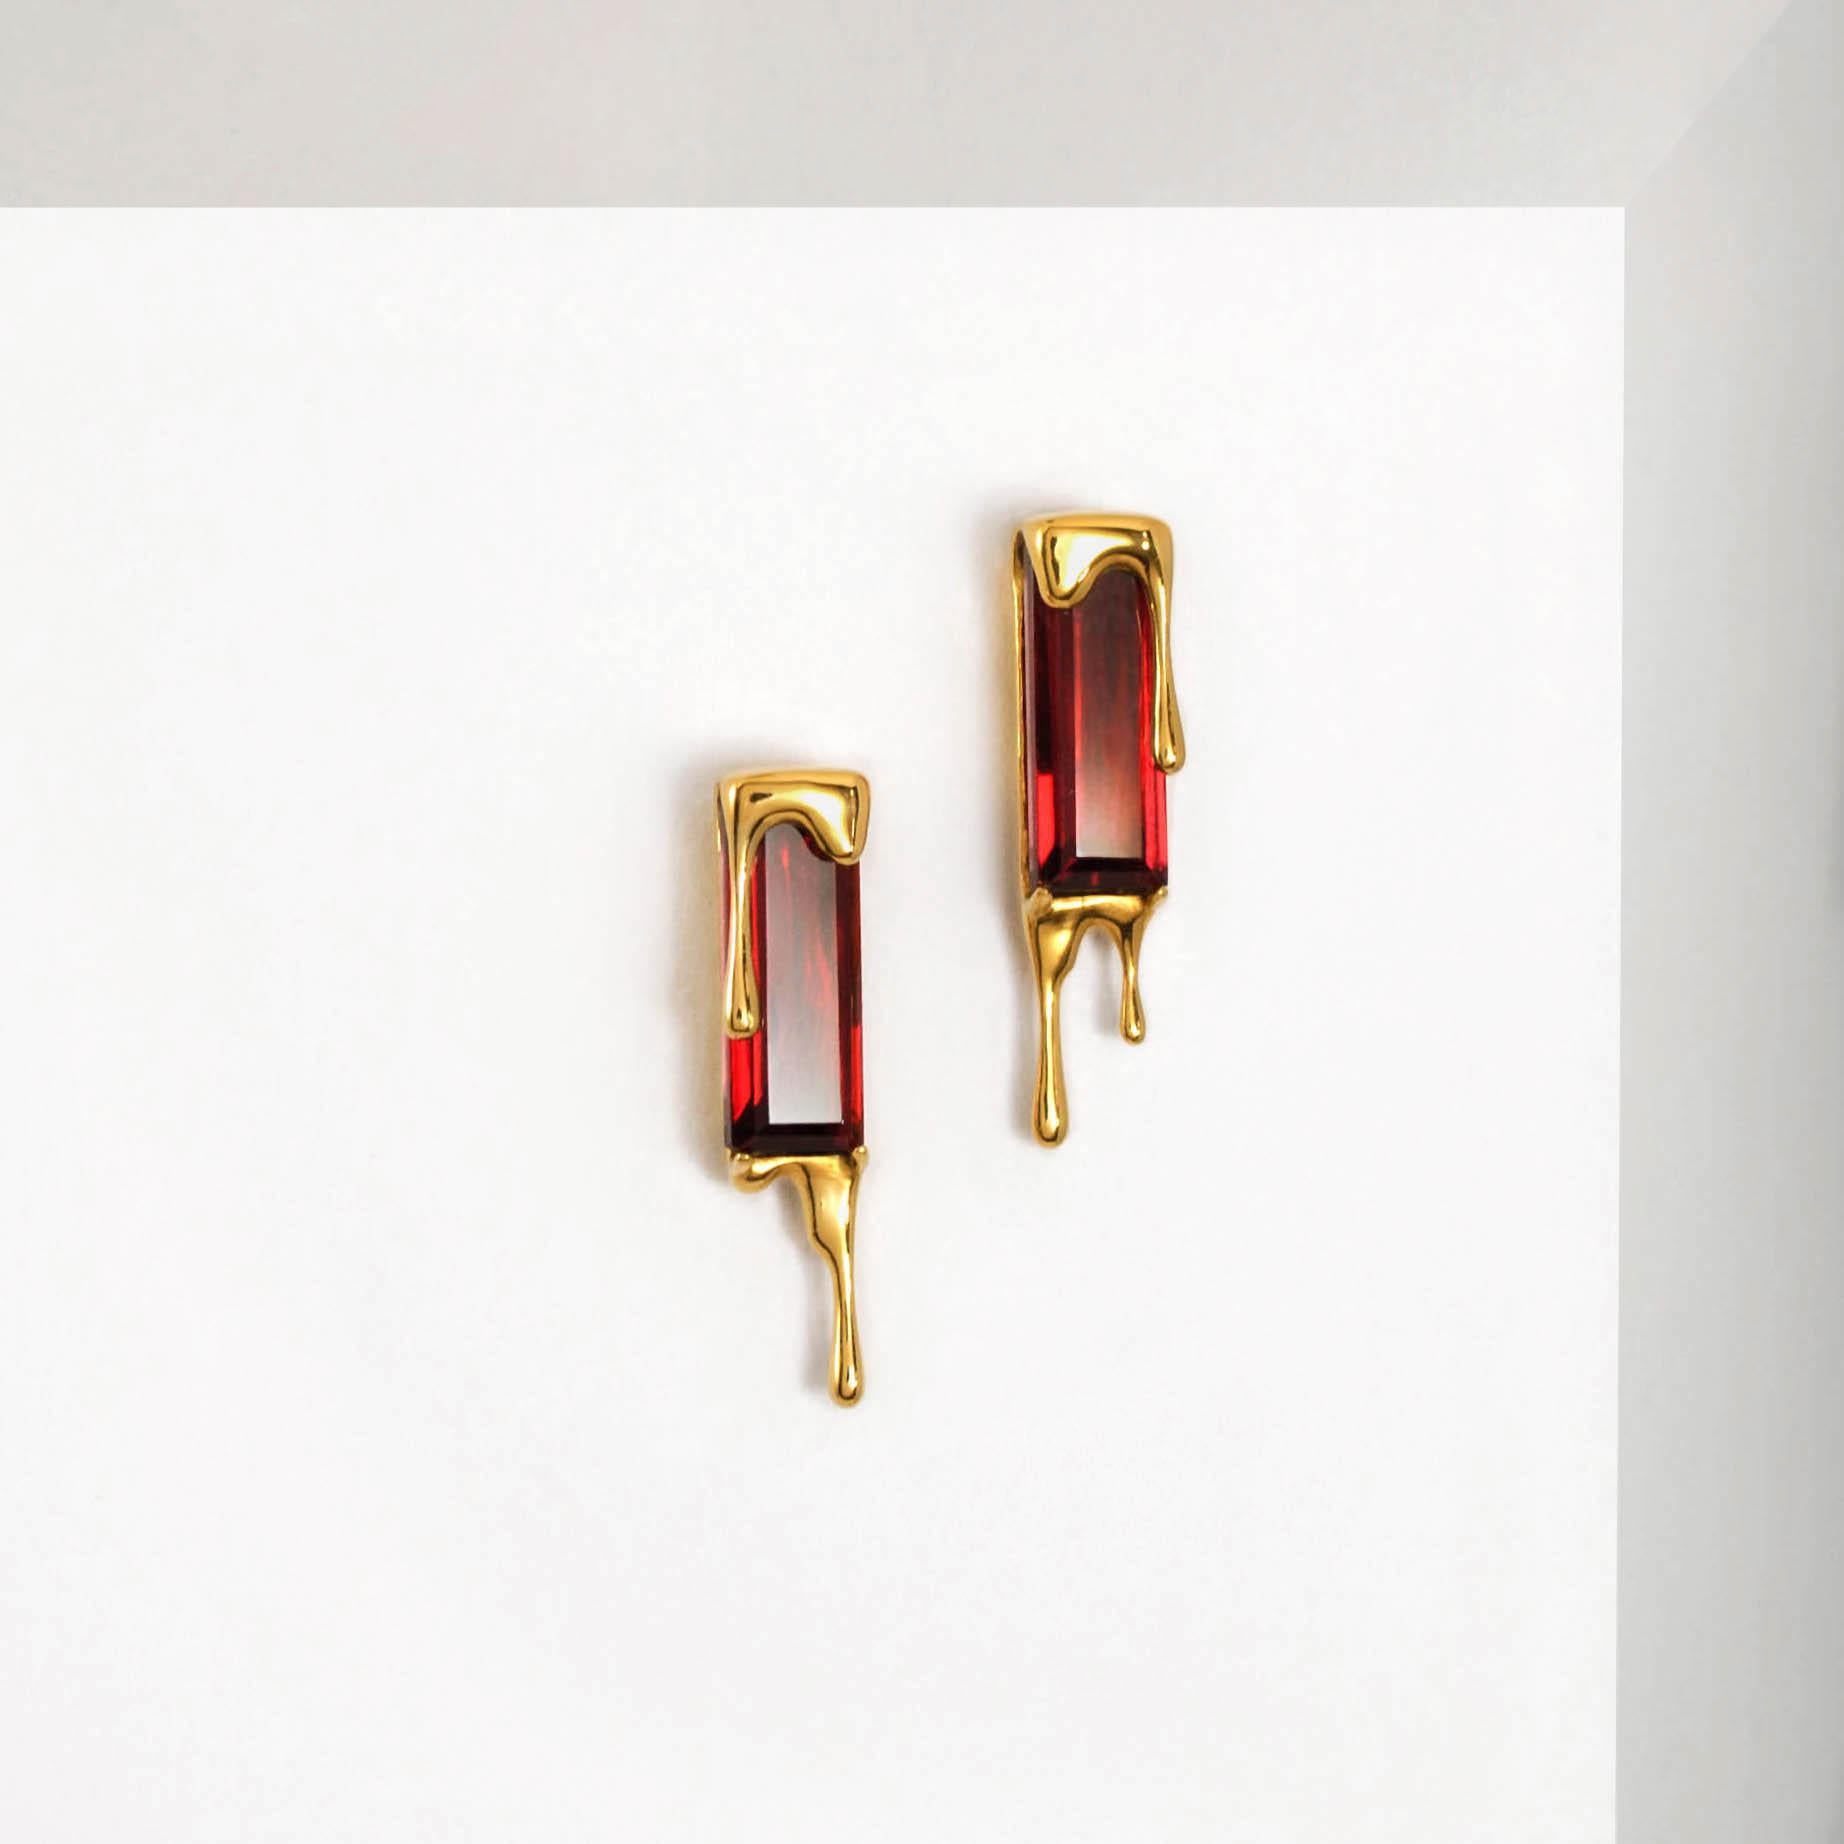 Dripping Garnet Gemstone 24k Gold Vermeil Earrings

Premium Quality Materials:
• 24K Gold Vermeil: Made in 925 Sterling Silver and coated with a thick layer of 24K Gold to 2.5 Microns thickness
• Sold as a Pair with Butterfly and Hypoallergenic